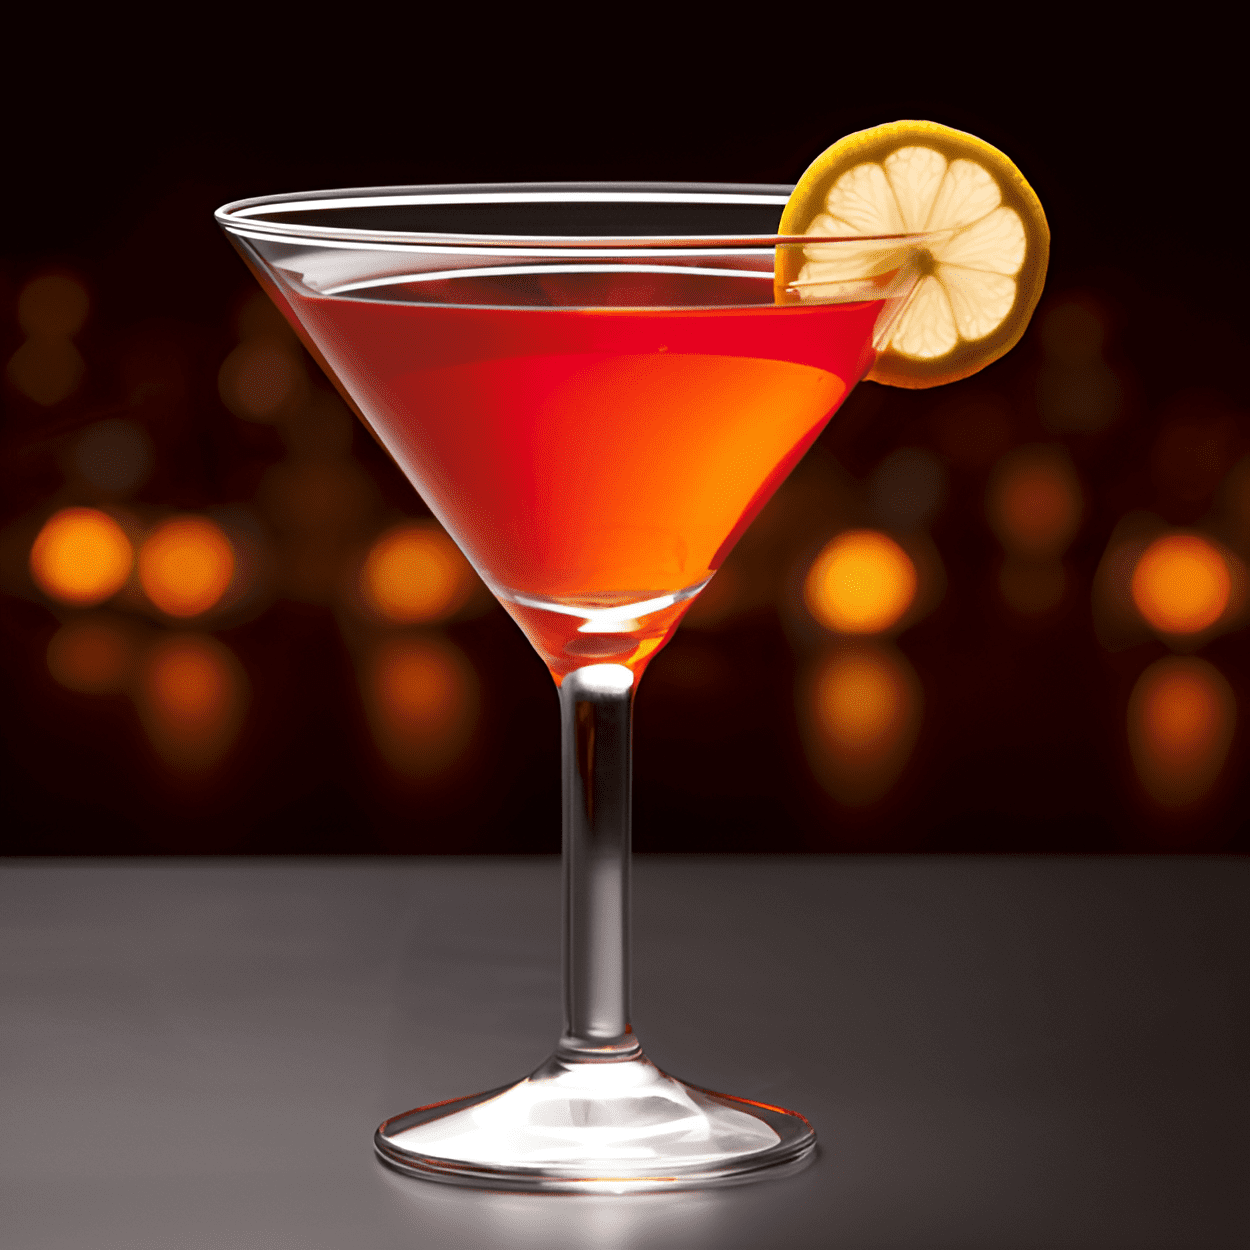 Nuclear Bomb Cocktail Recipe - The Nuclear Bomb is a strong, robust cocktail with a fiery kick. It's sweet and sour, with a hint of bitterness. The taste is complex and layered, with the whiskey and absinthe providing a strong base, and the lime juice and grenadine adding a refreshing tang.